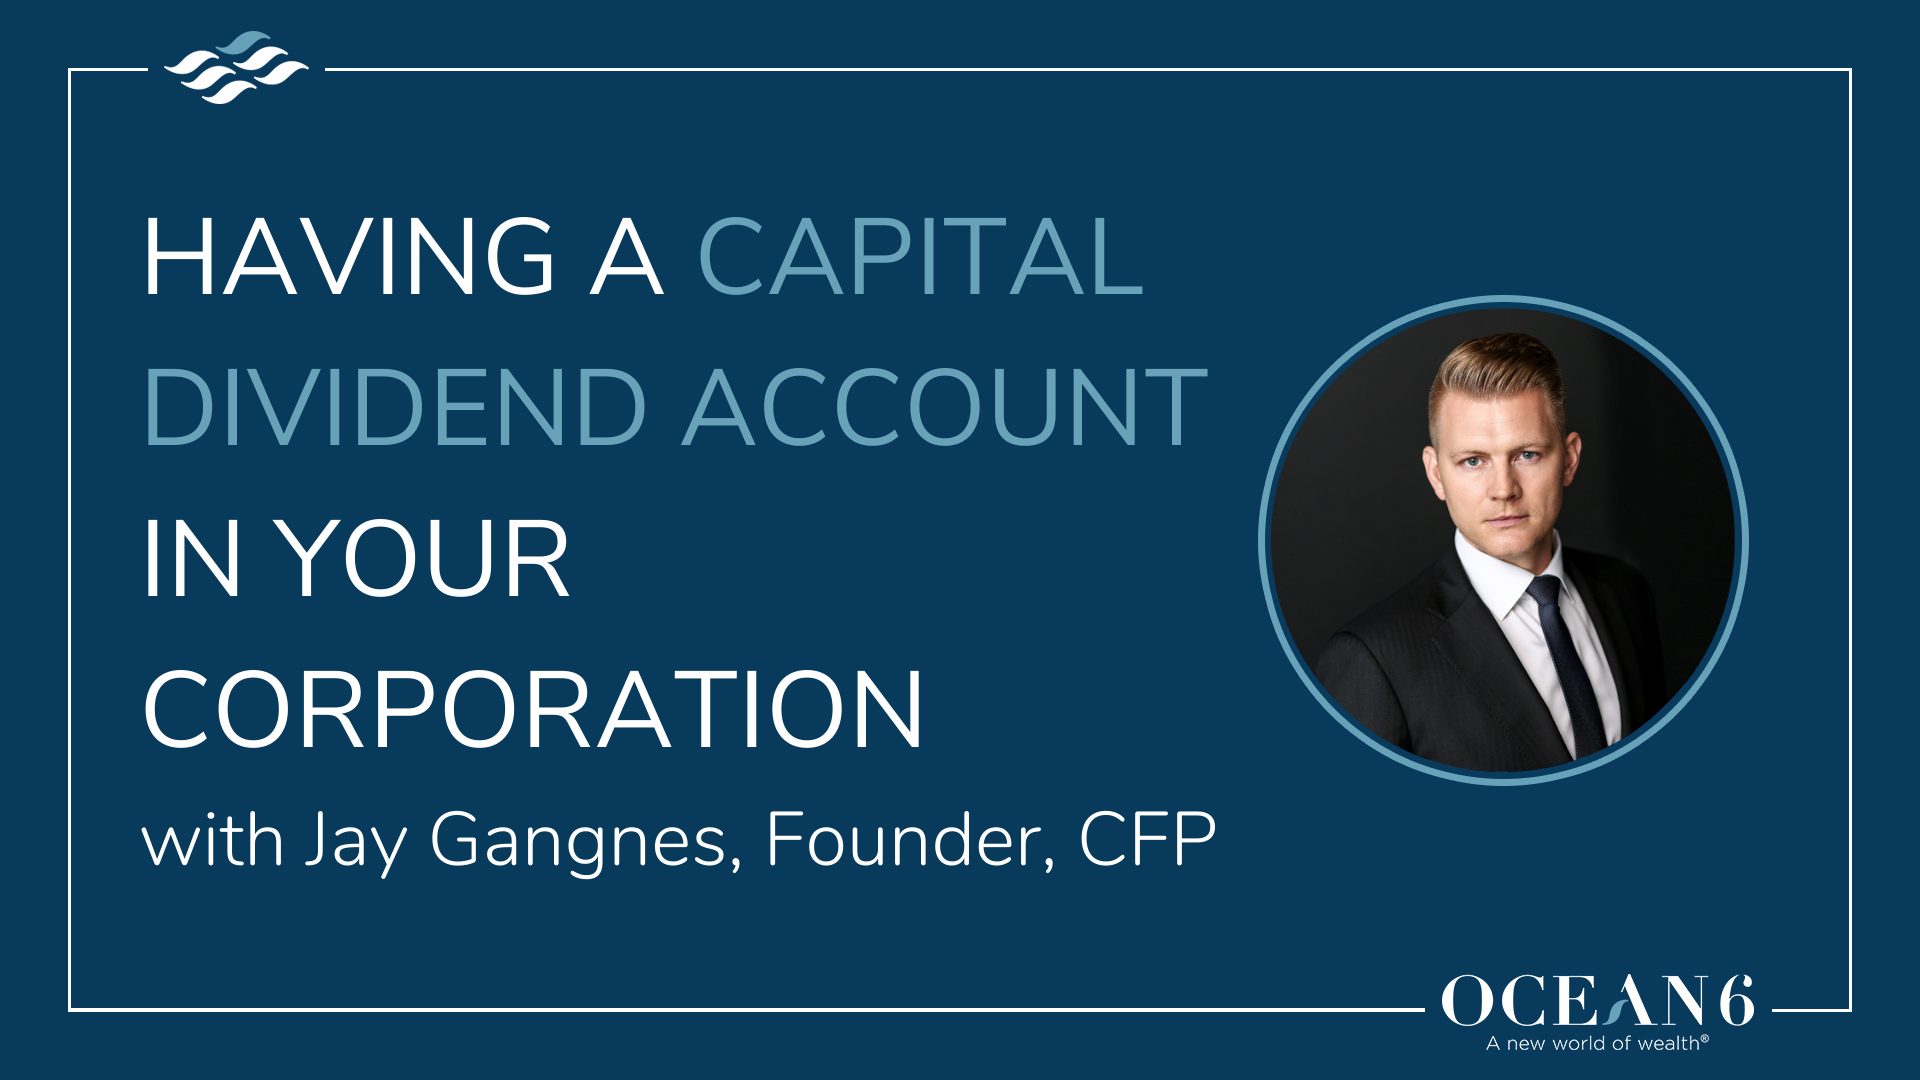 Why You Should Have A Capital Dividend Account In Your Corporation